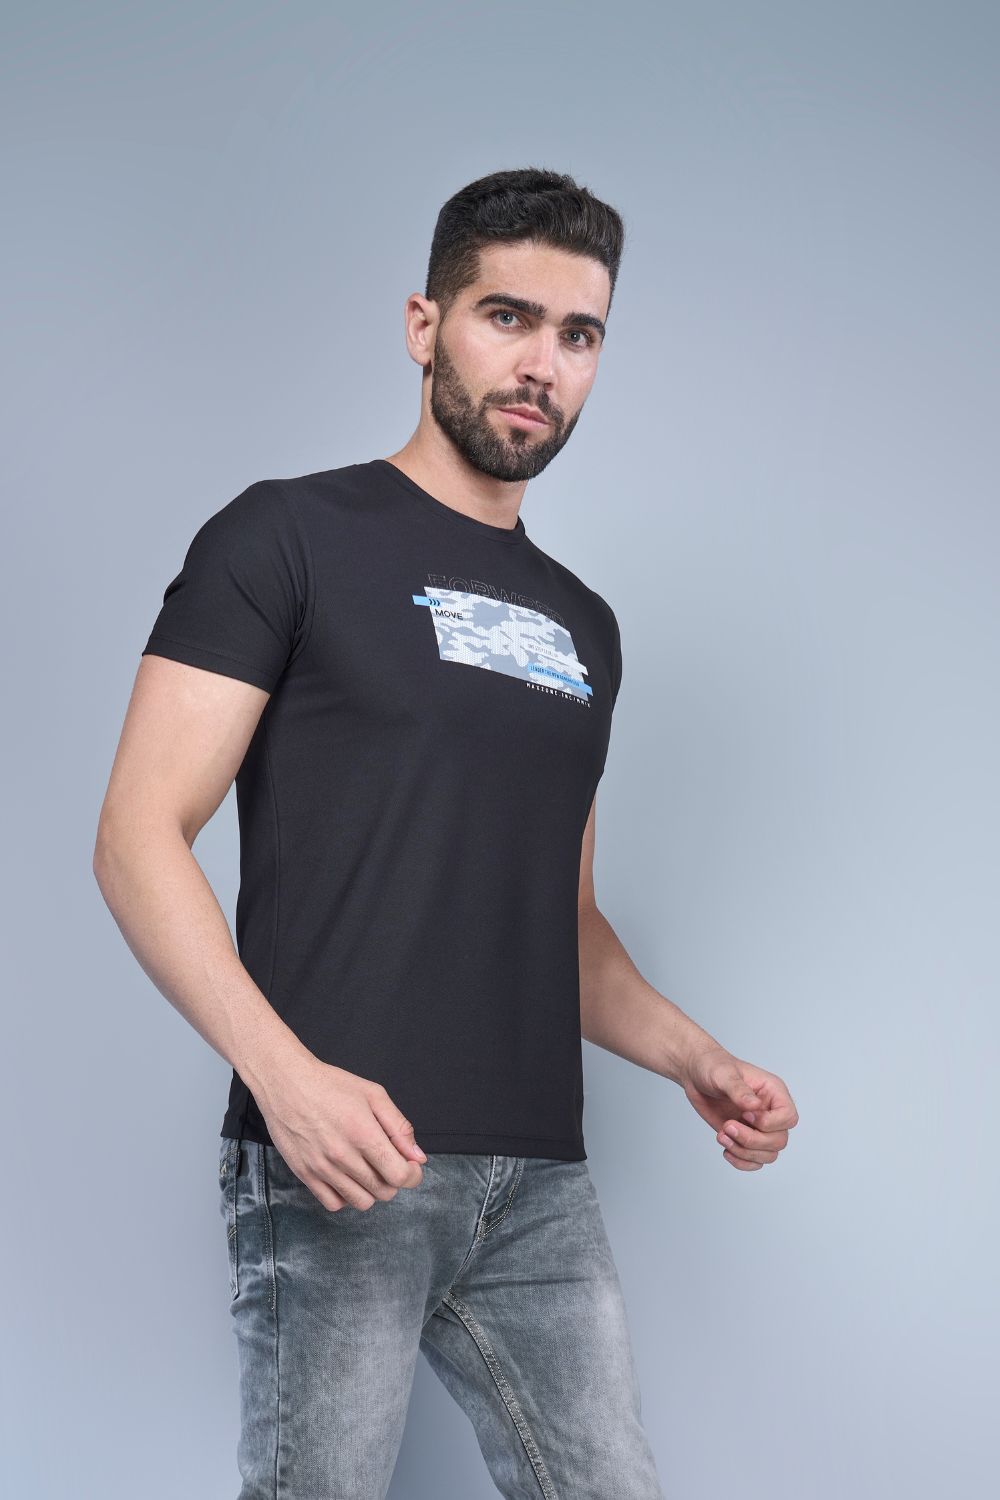 MAXZONE CLOTHING full natural black graphic open neck tee shirt